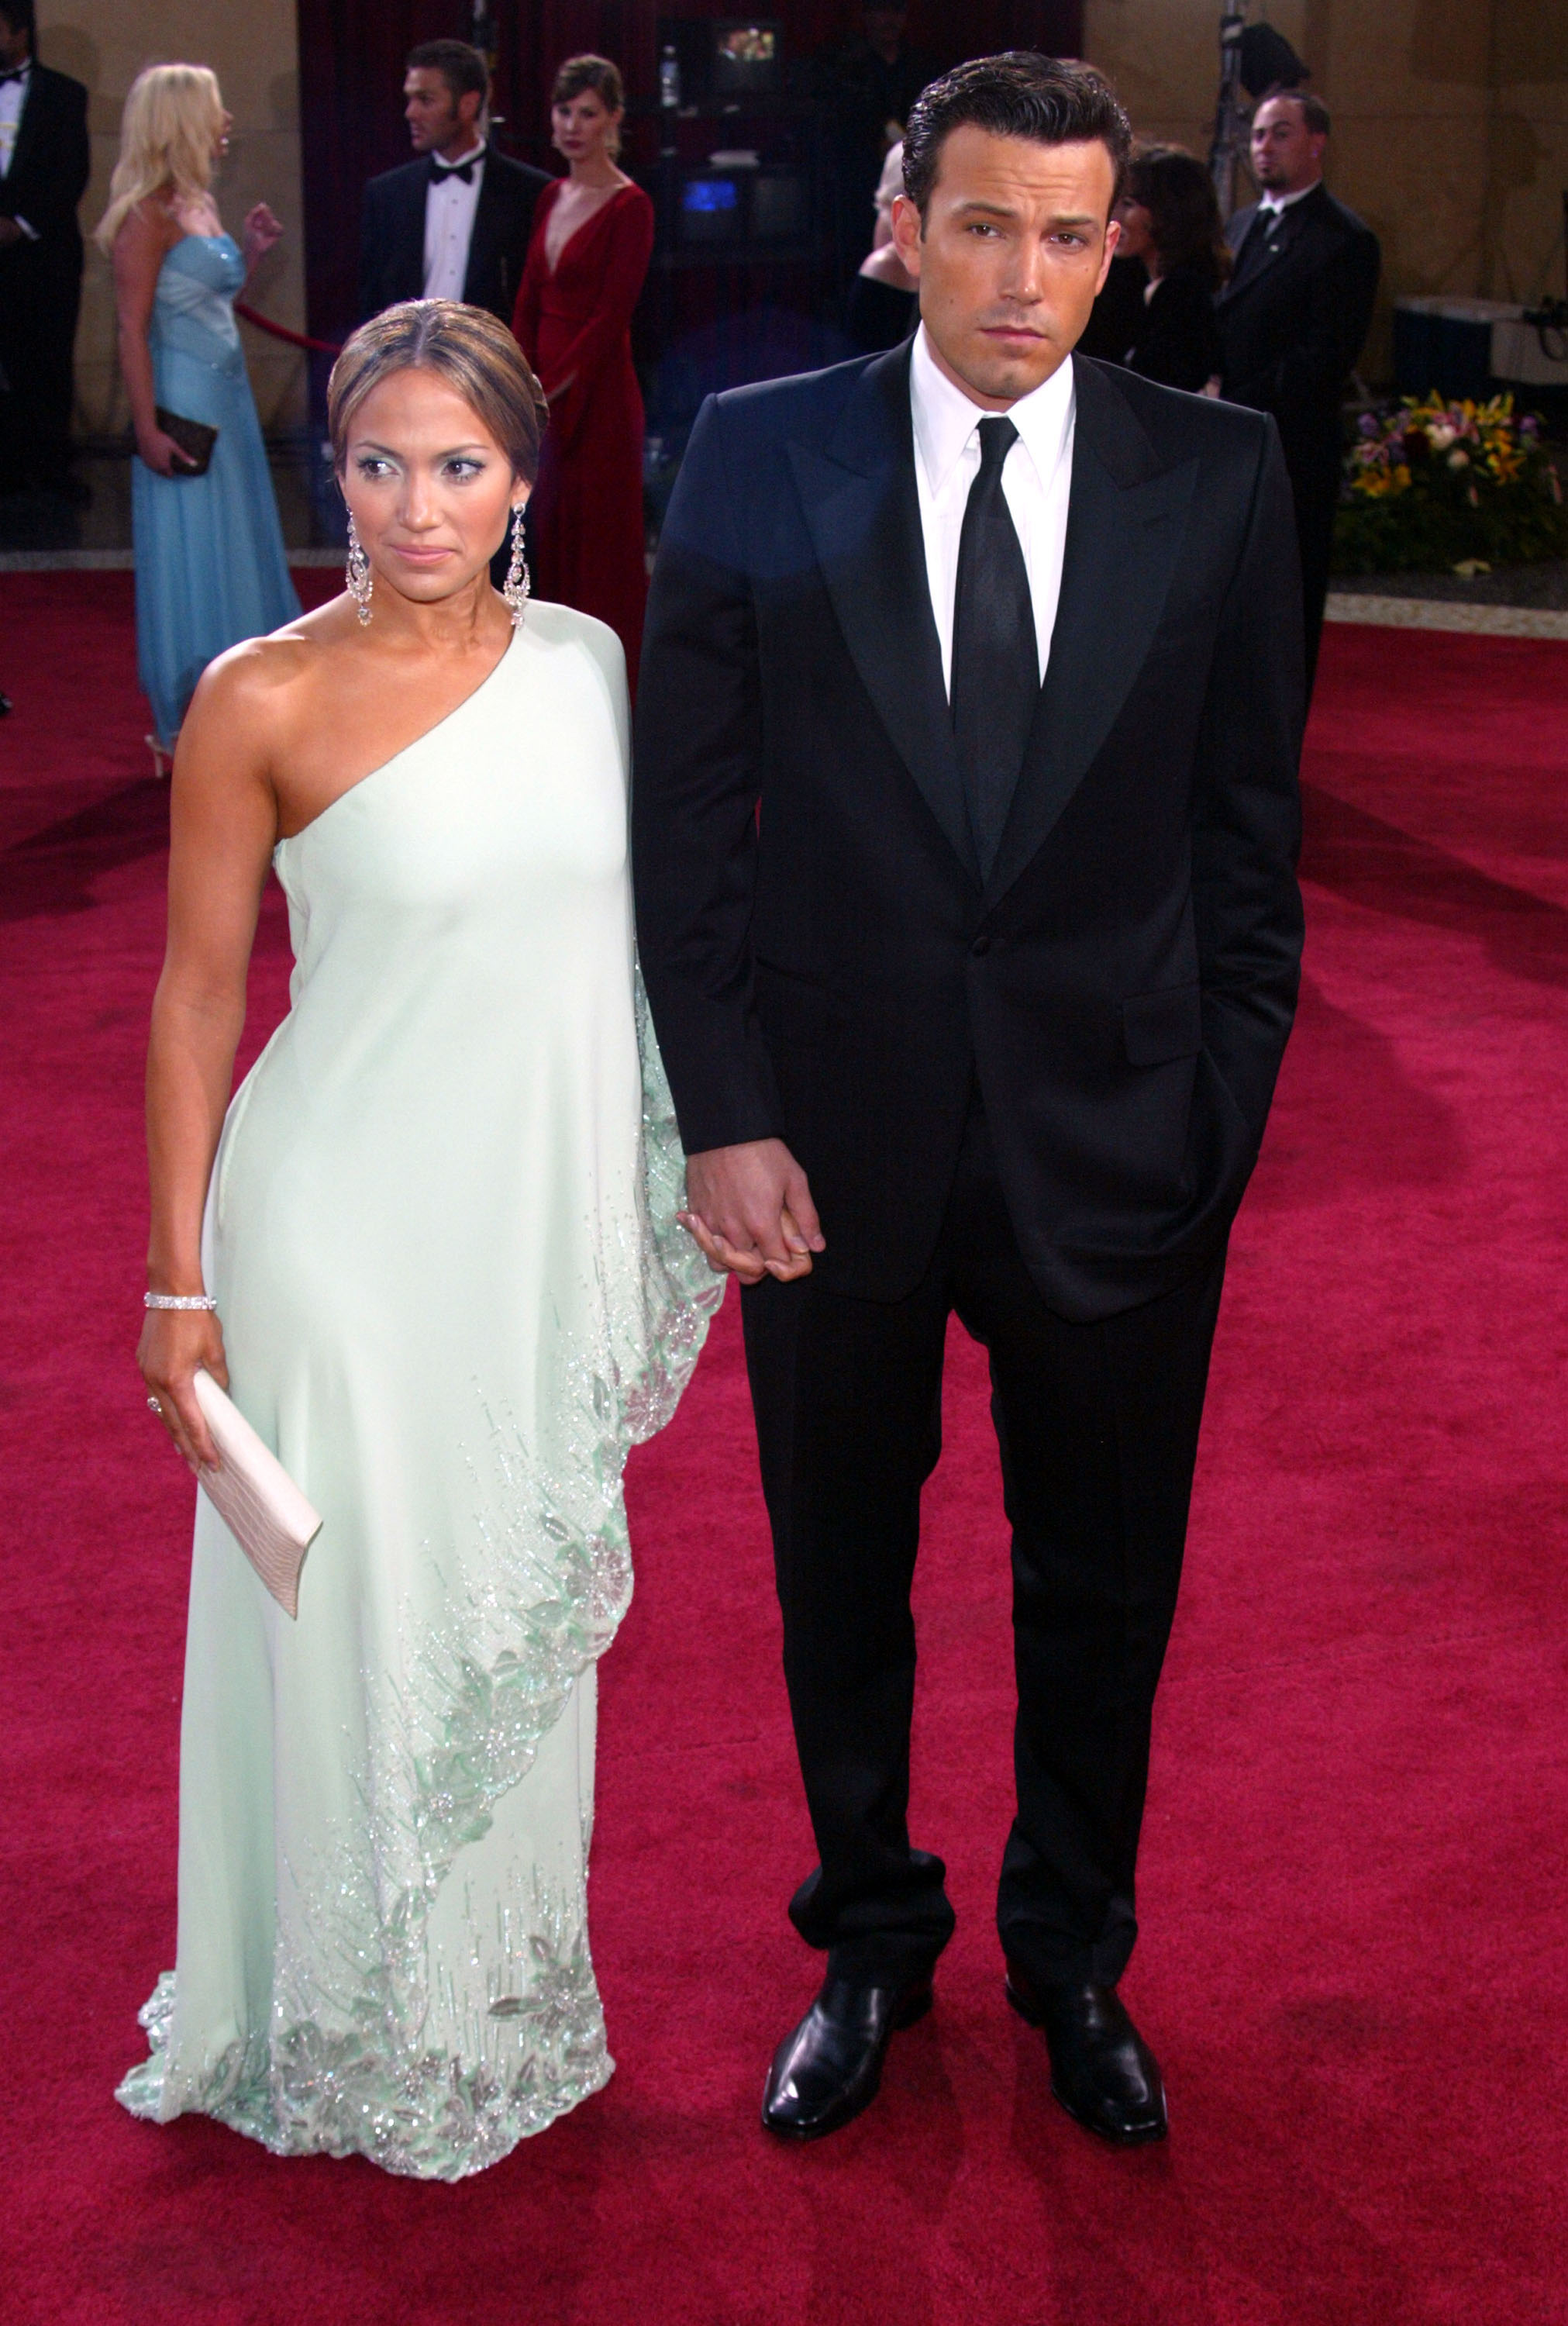 Jennifer Lopez and Ben Affleck at the 75th Annual Academy Awards in Hollywood, California in 2003. | Source: Getty Images